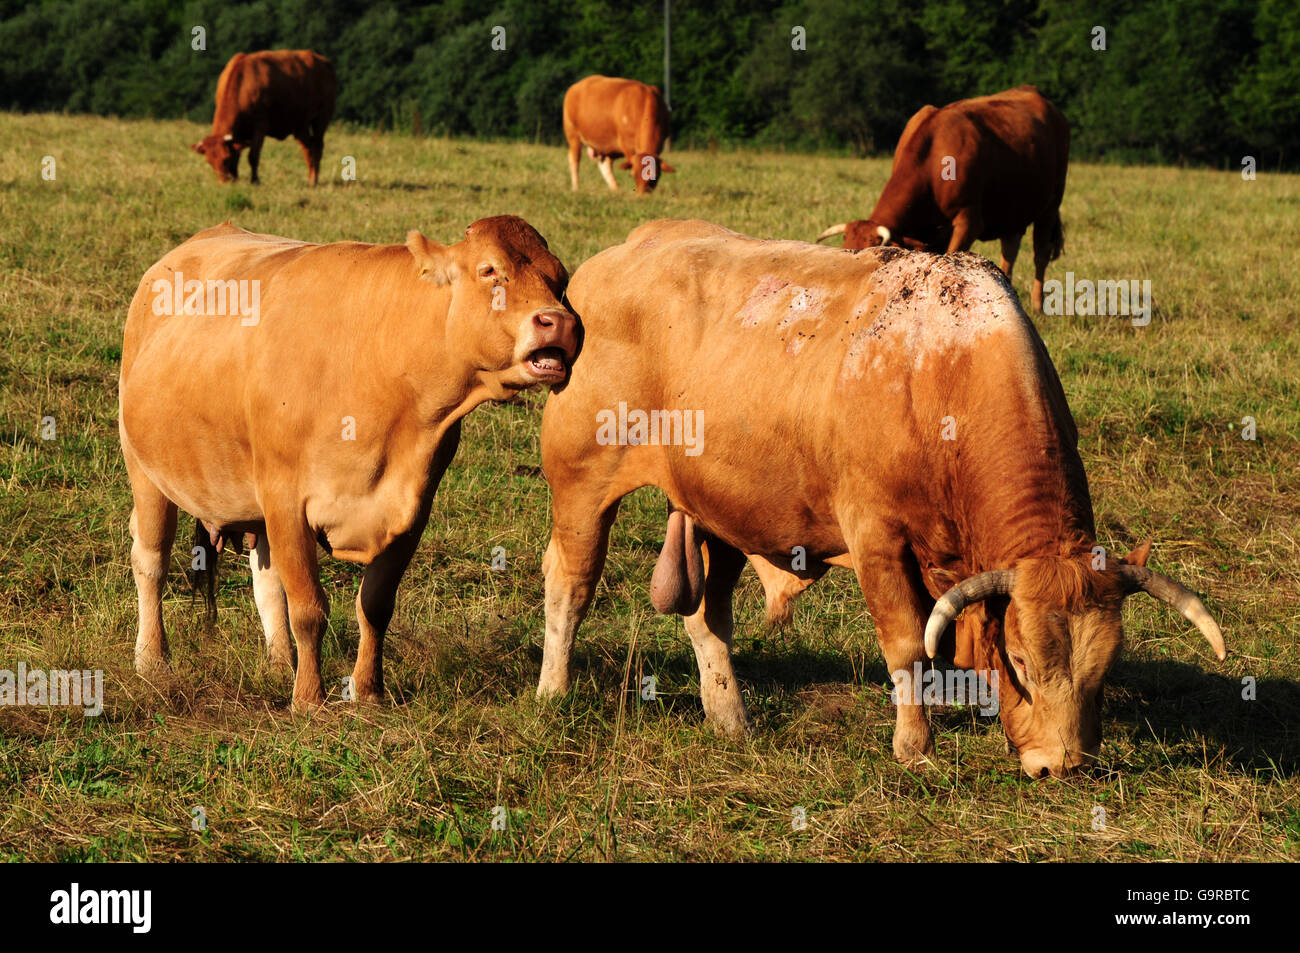 Limousin Cattle, cow and bull / suckler cow husbandry Stock Photo